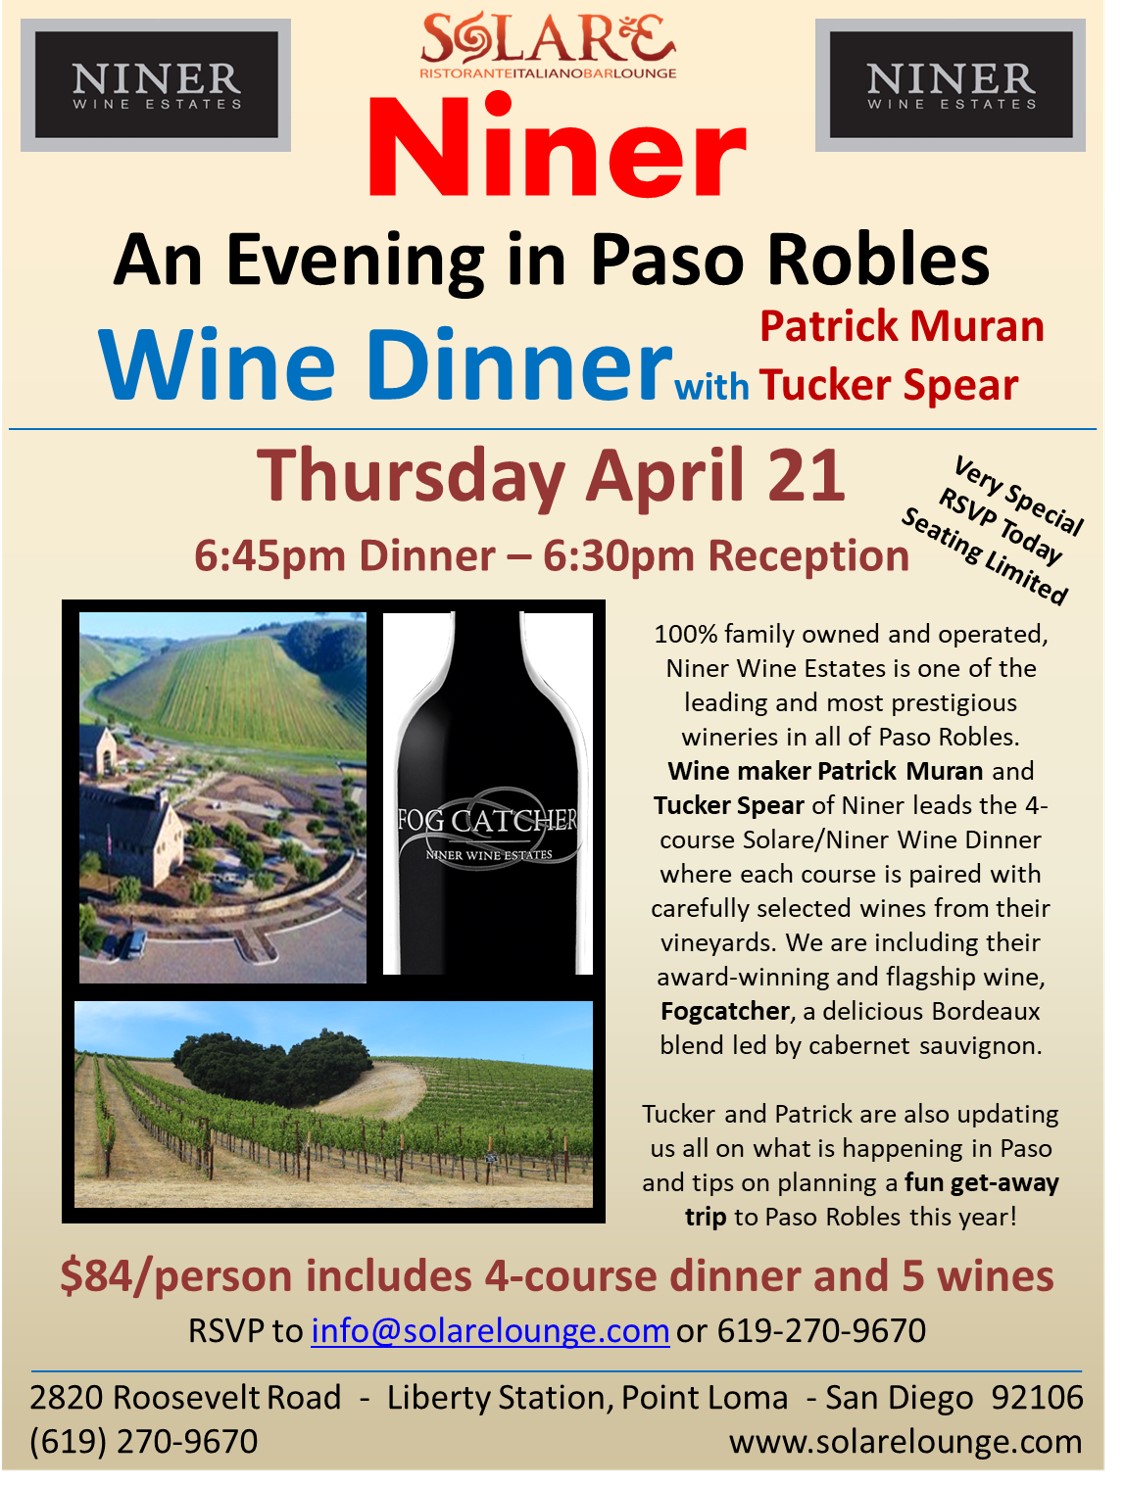 <a id="Solare-Niner-Wine-Dinner"></a>Niner Estate Wine Dinner at Solare with Winemaker, Patrick Muran and Tucker Spear